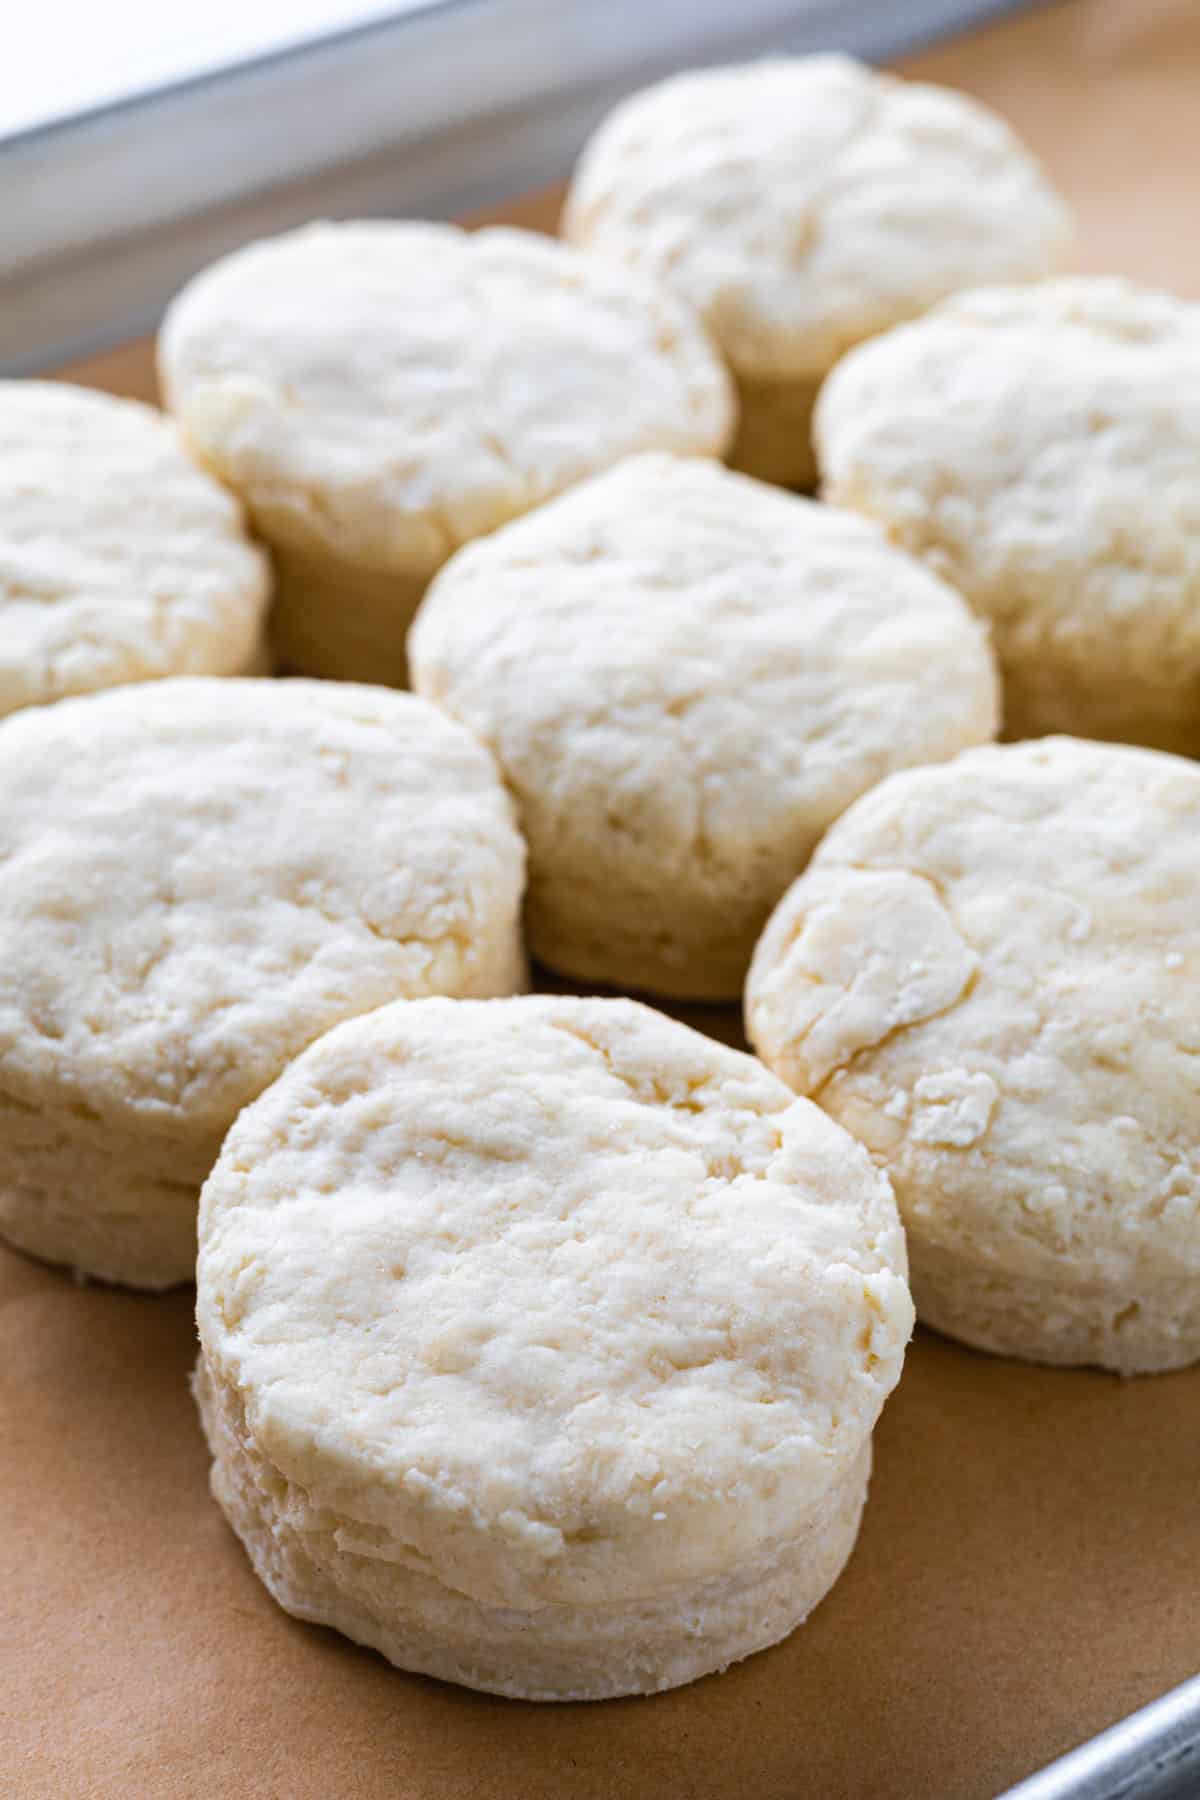 Unbaked biscuits on a parchment-lined tray.